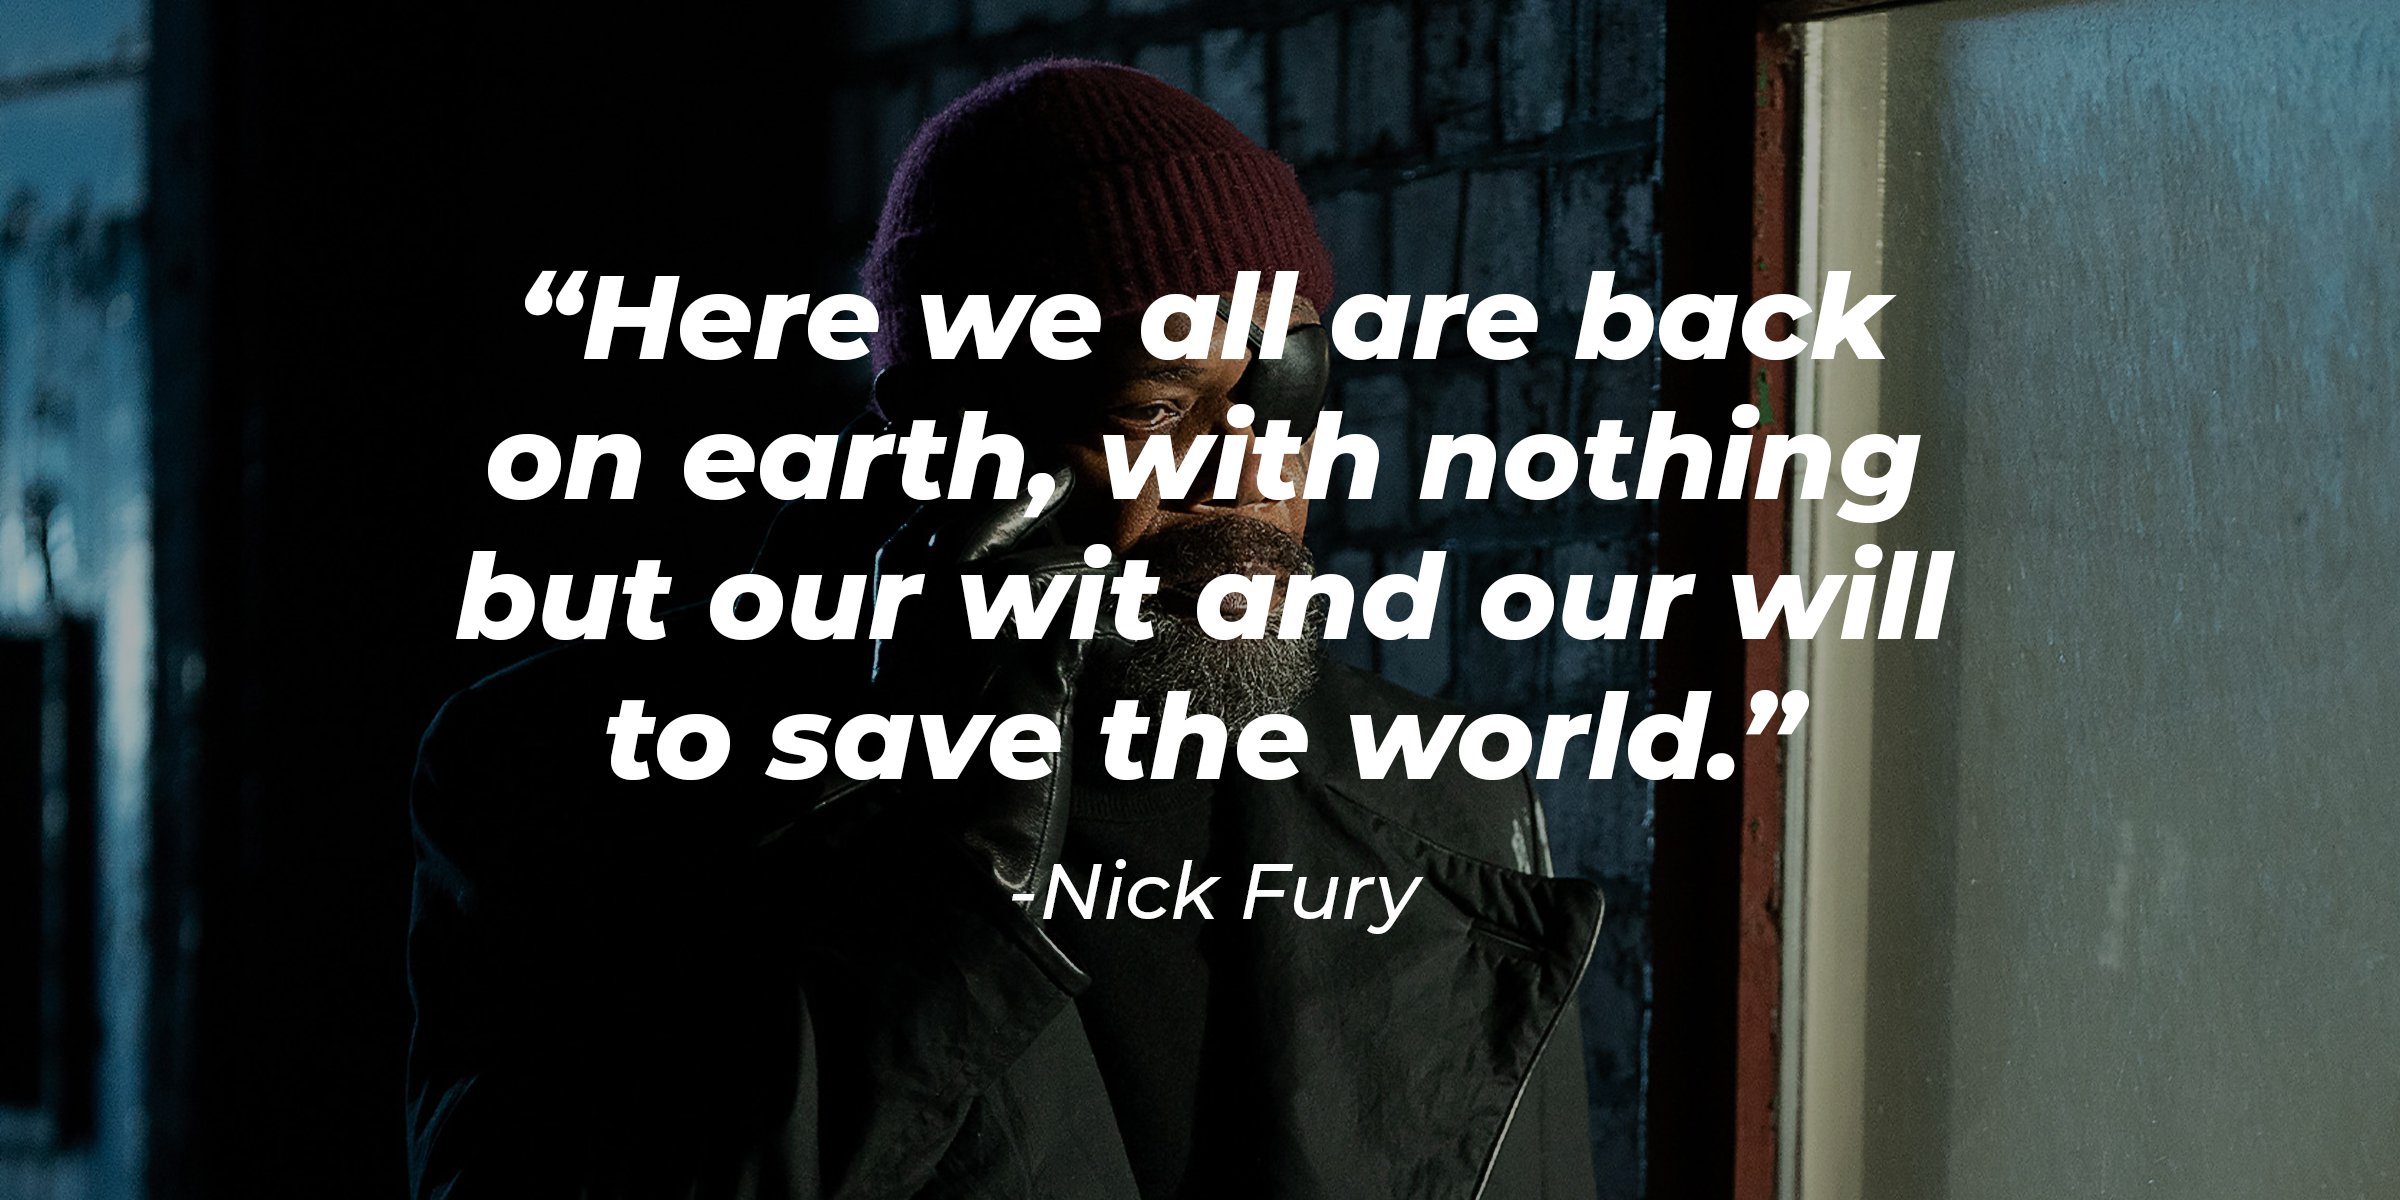 An image of Nick Fury with his quote: "Here we all are back on earth, with nothing but our wit and our will to save the world." | Source: Facebook.com/Marvel